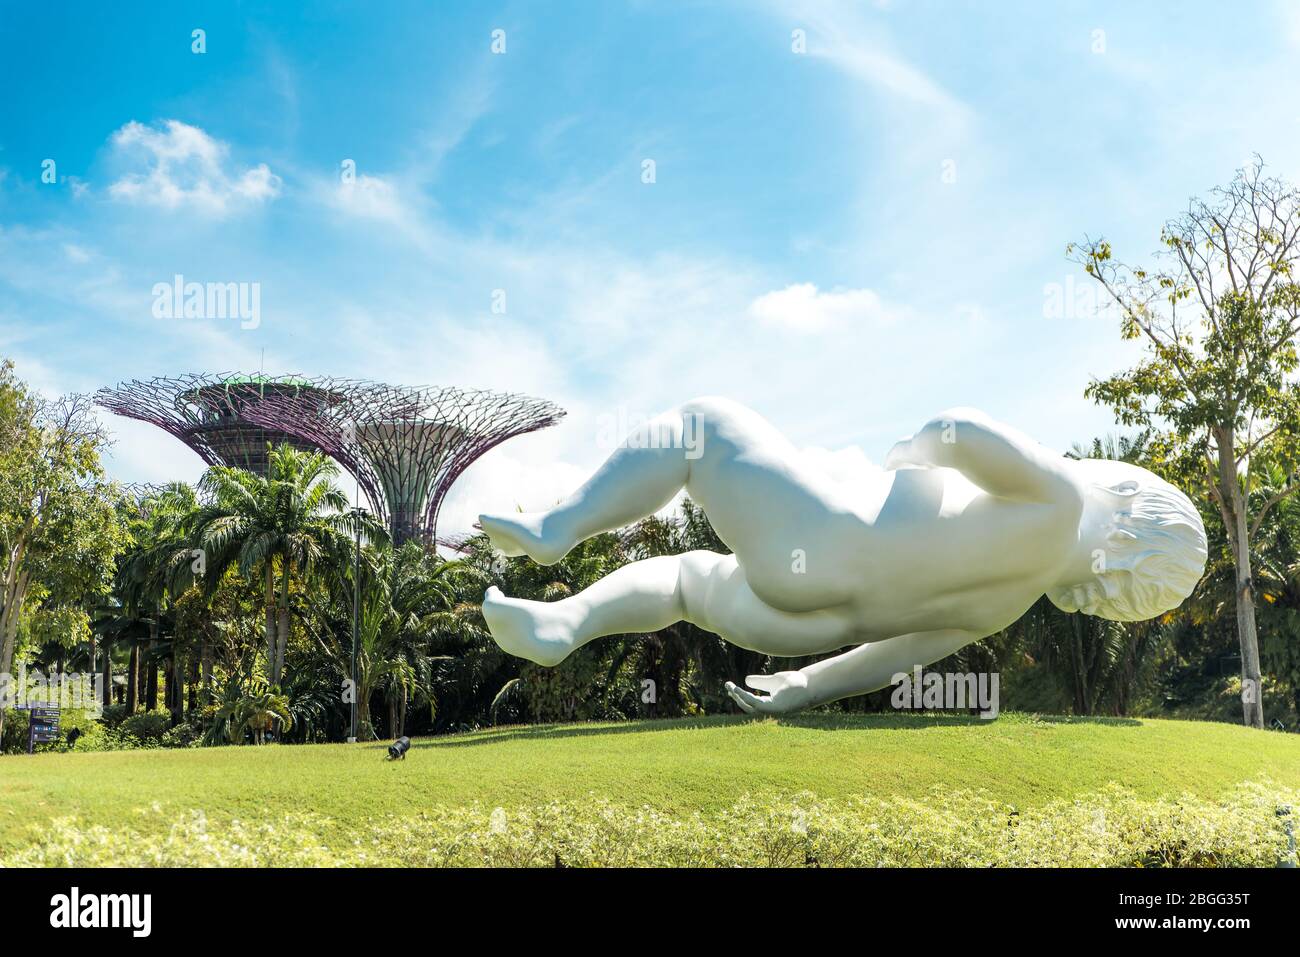 Singapore, Oct 2019: Marc Quinn's giant baby sculpture, called the 'Planet', floating in the air at Gardens by the Bay park Stock Photo